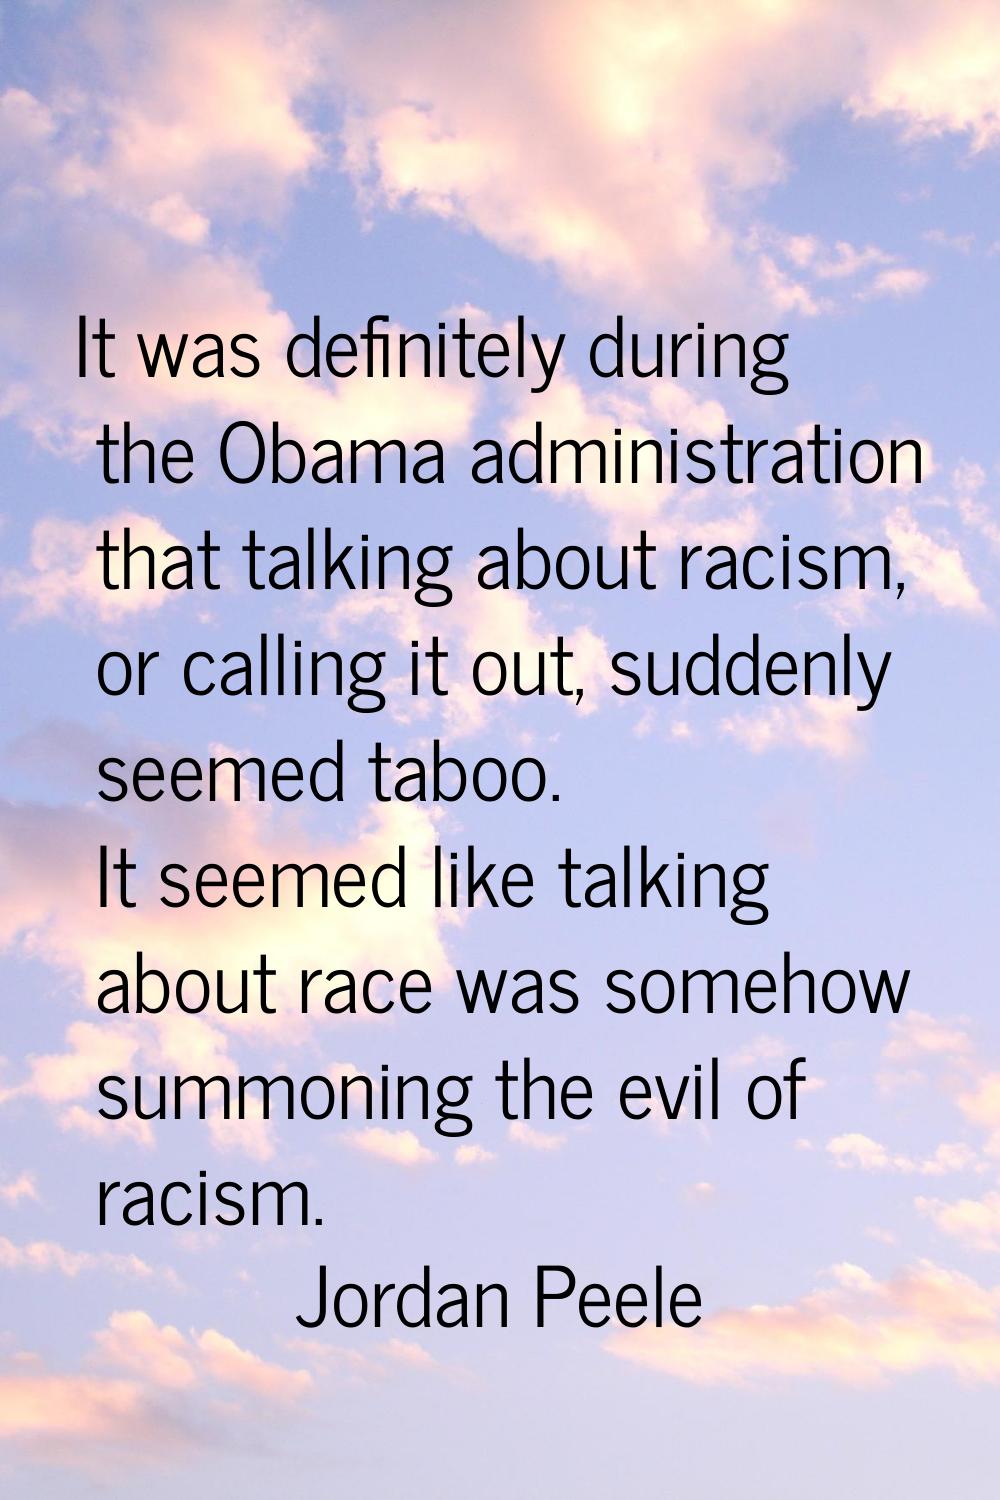 It was definitely during the Obama administration that talking about racism, or calling it out, sud